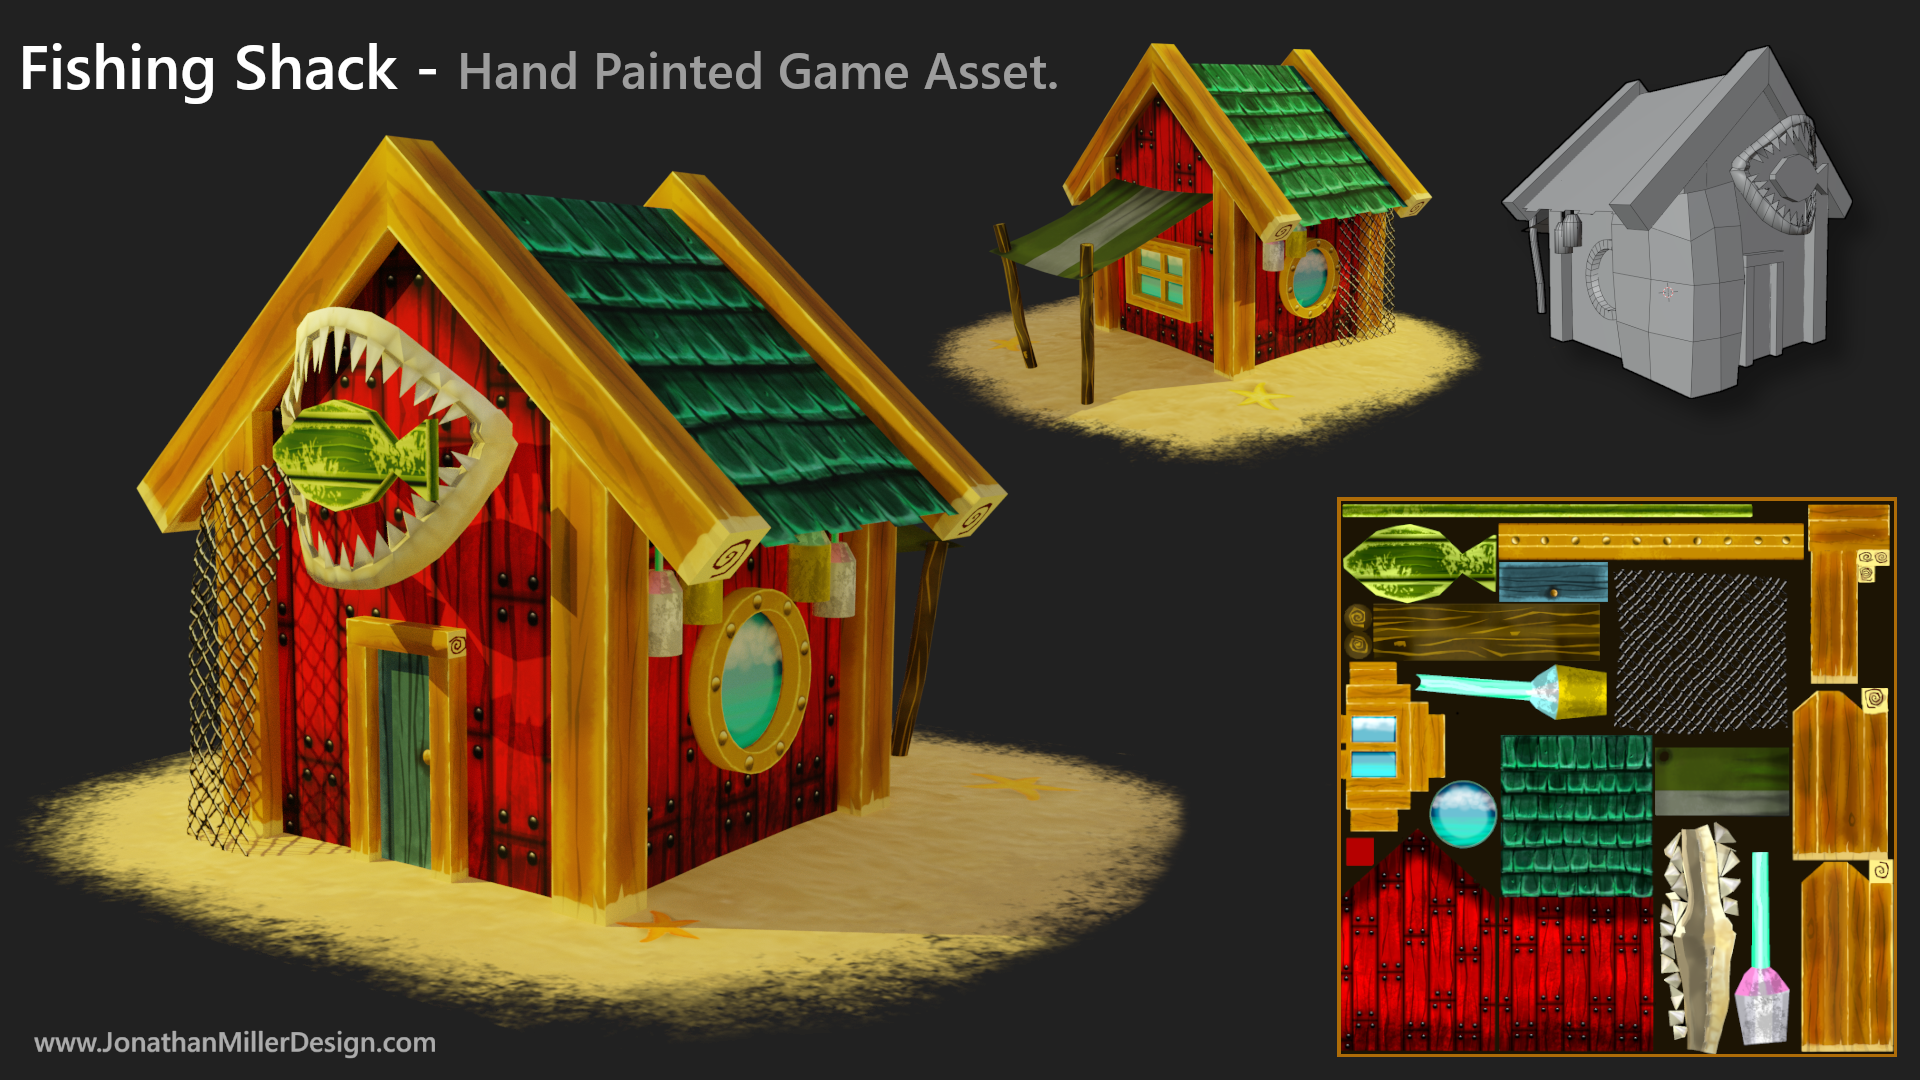 Game Asset Hand Painted Fishing Shack